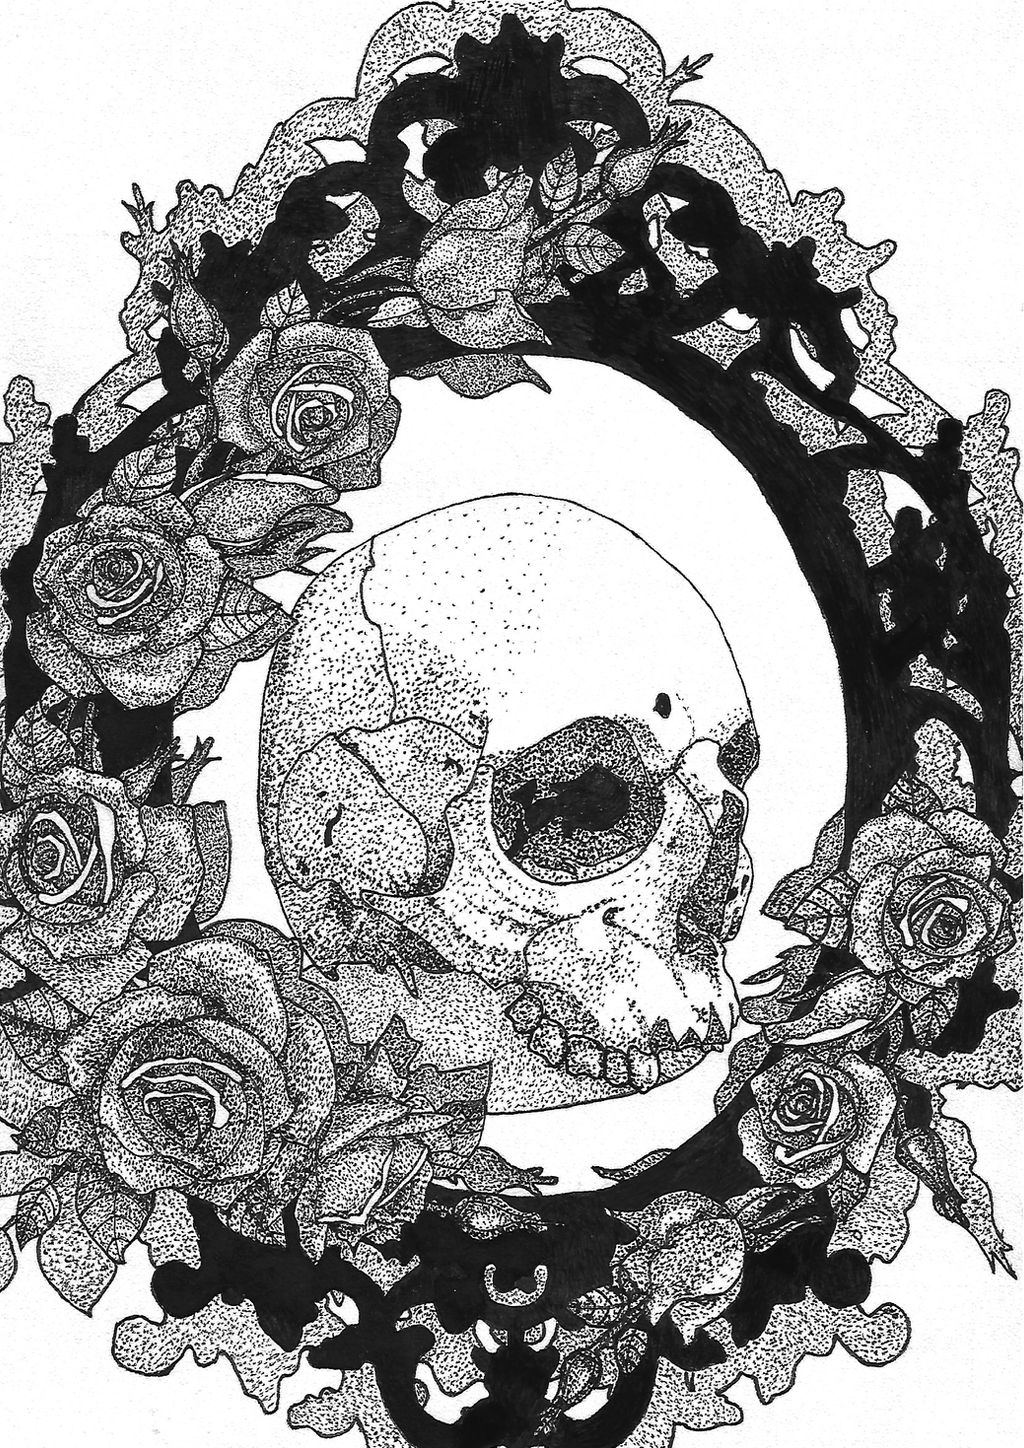 Tattoo 3 - Skull in frame with roses